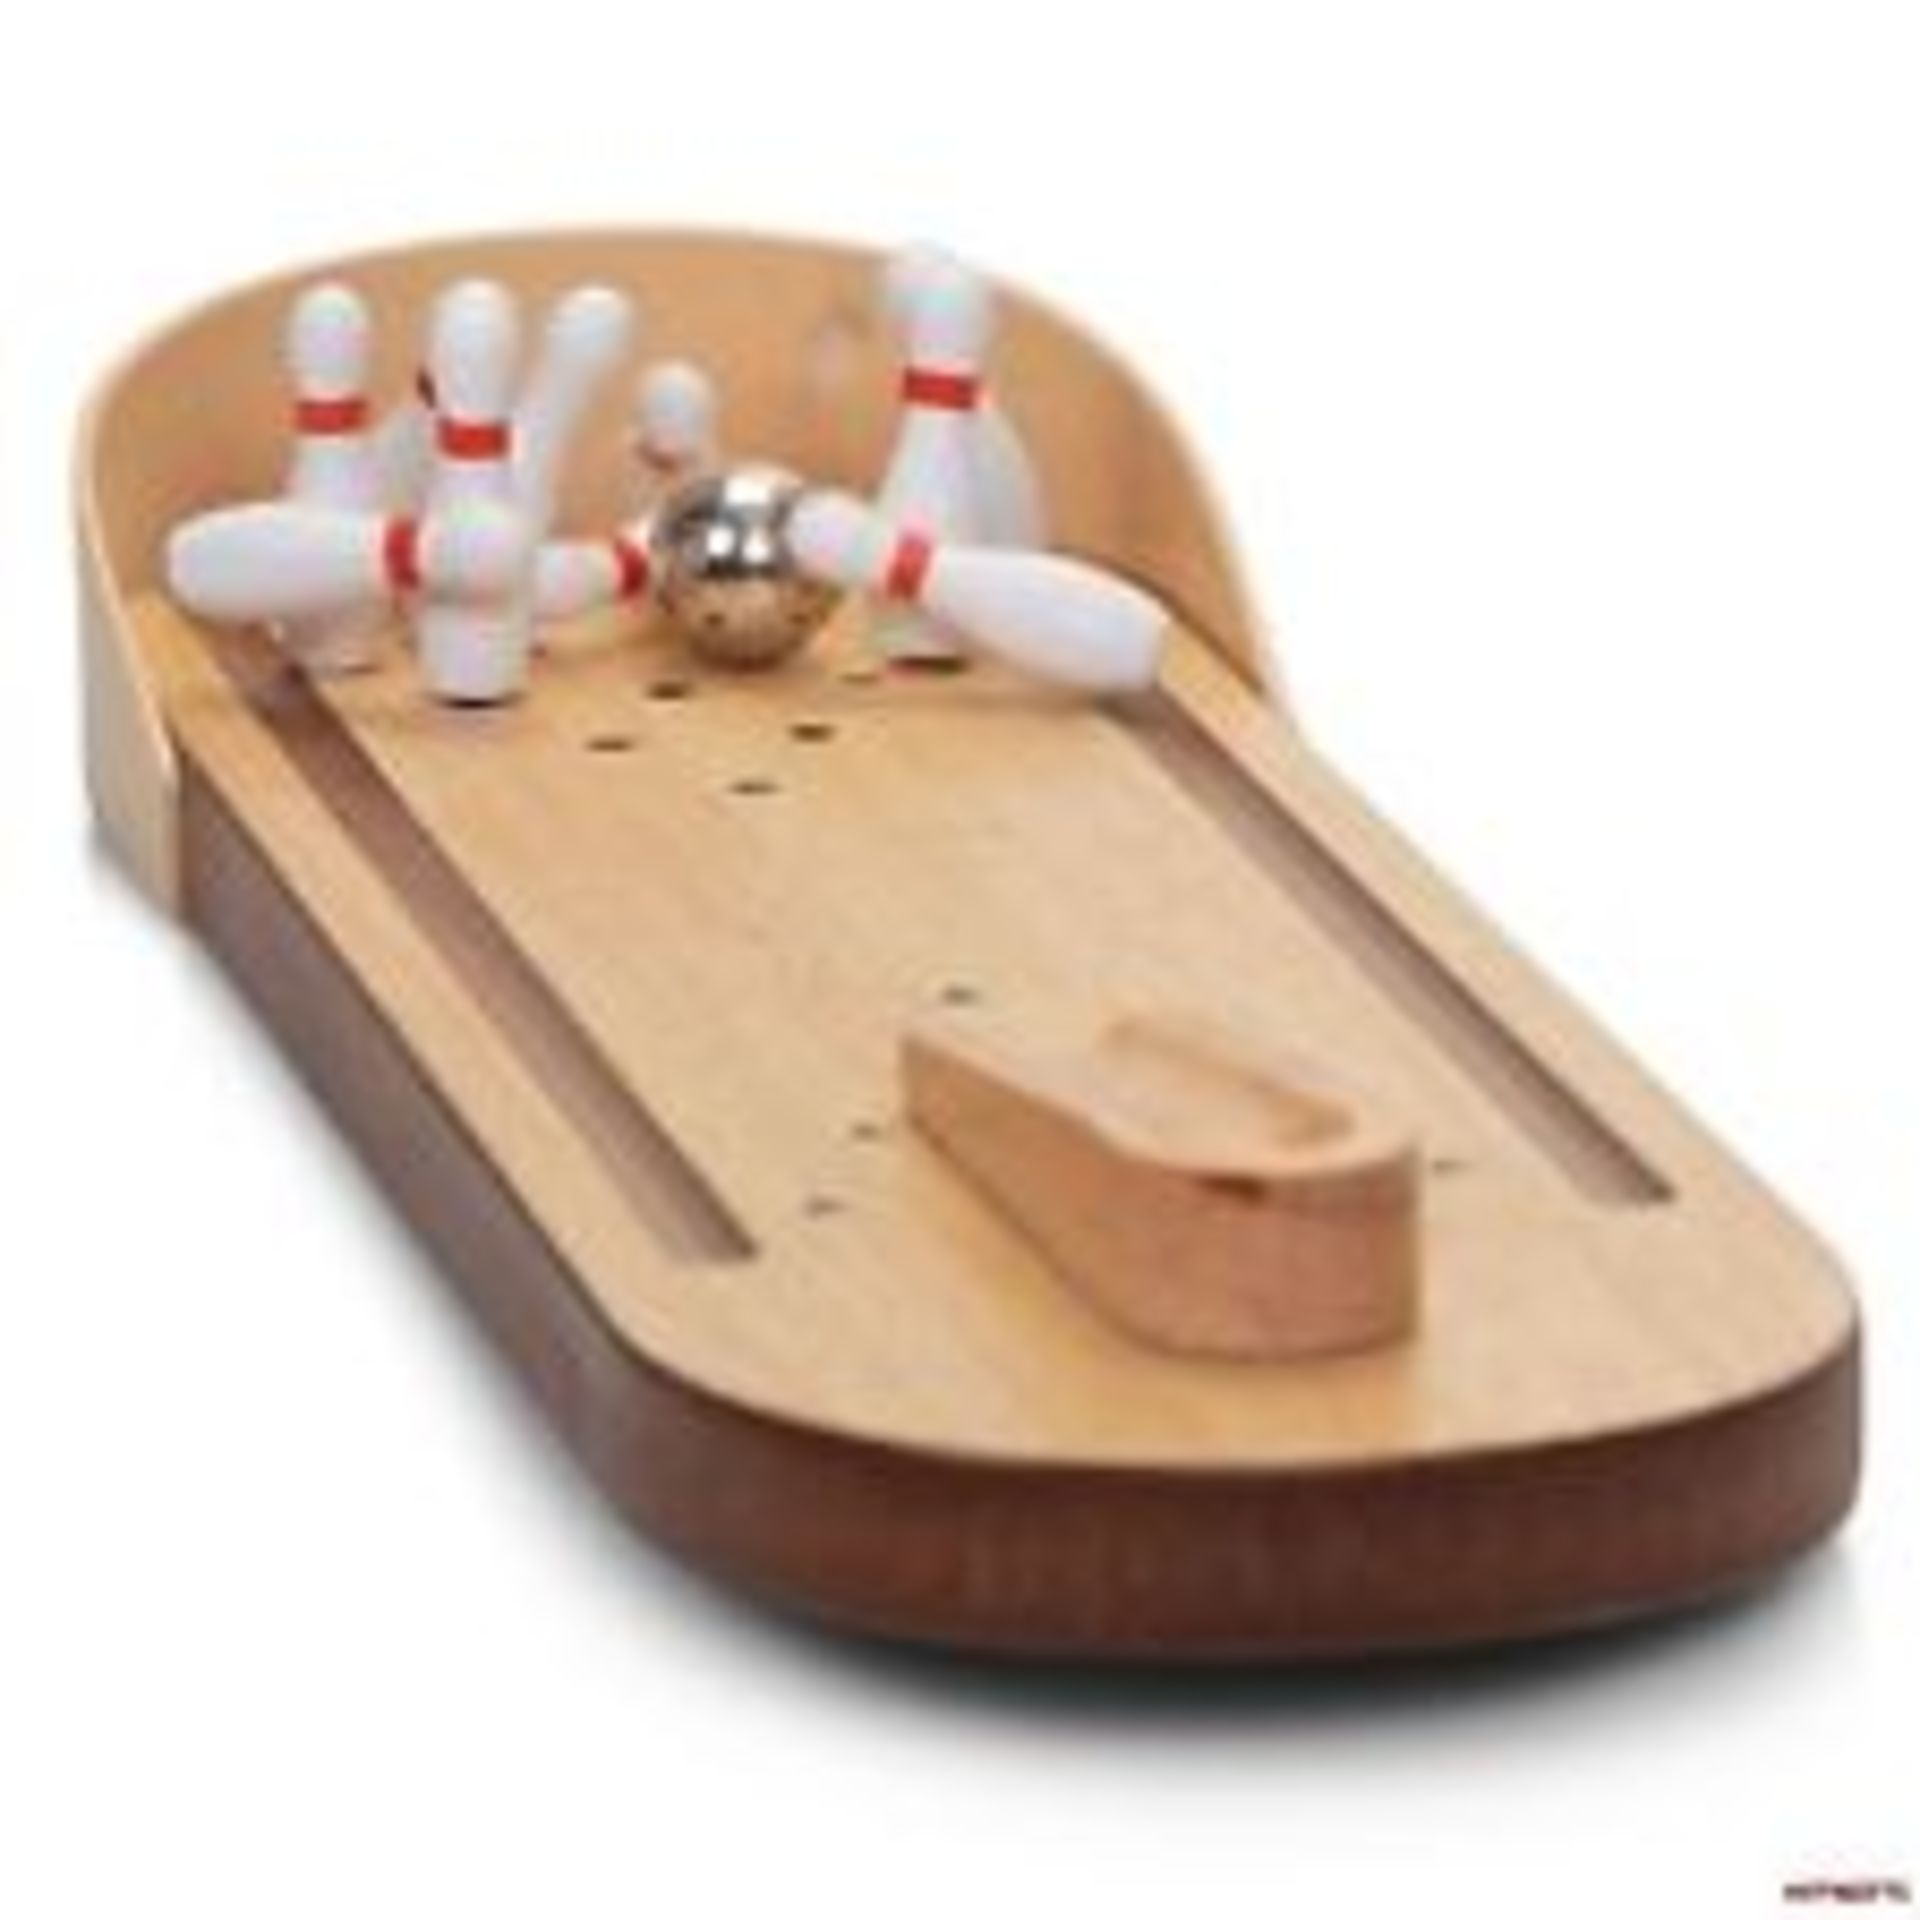 V *TRADE QTY* Brand New Ten Pin Bowling Alley Game X 4 Bid price to be multiplied by Four